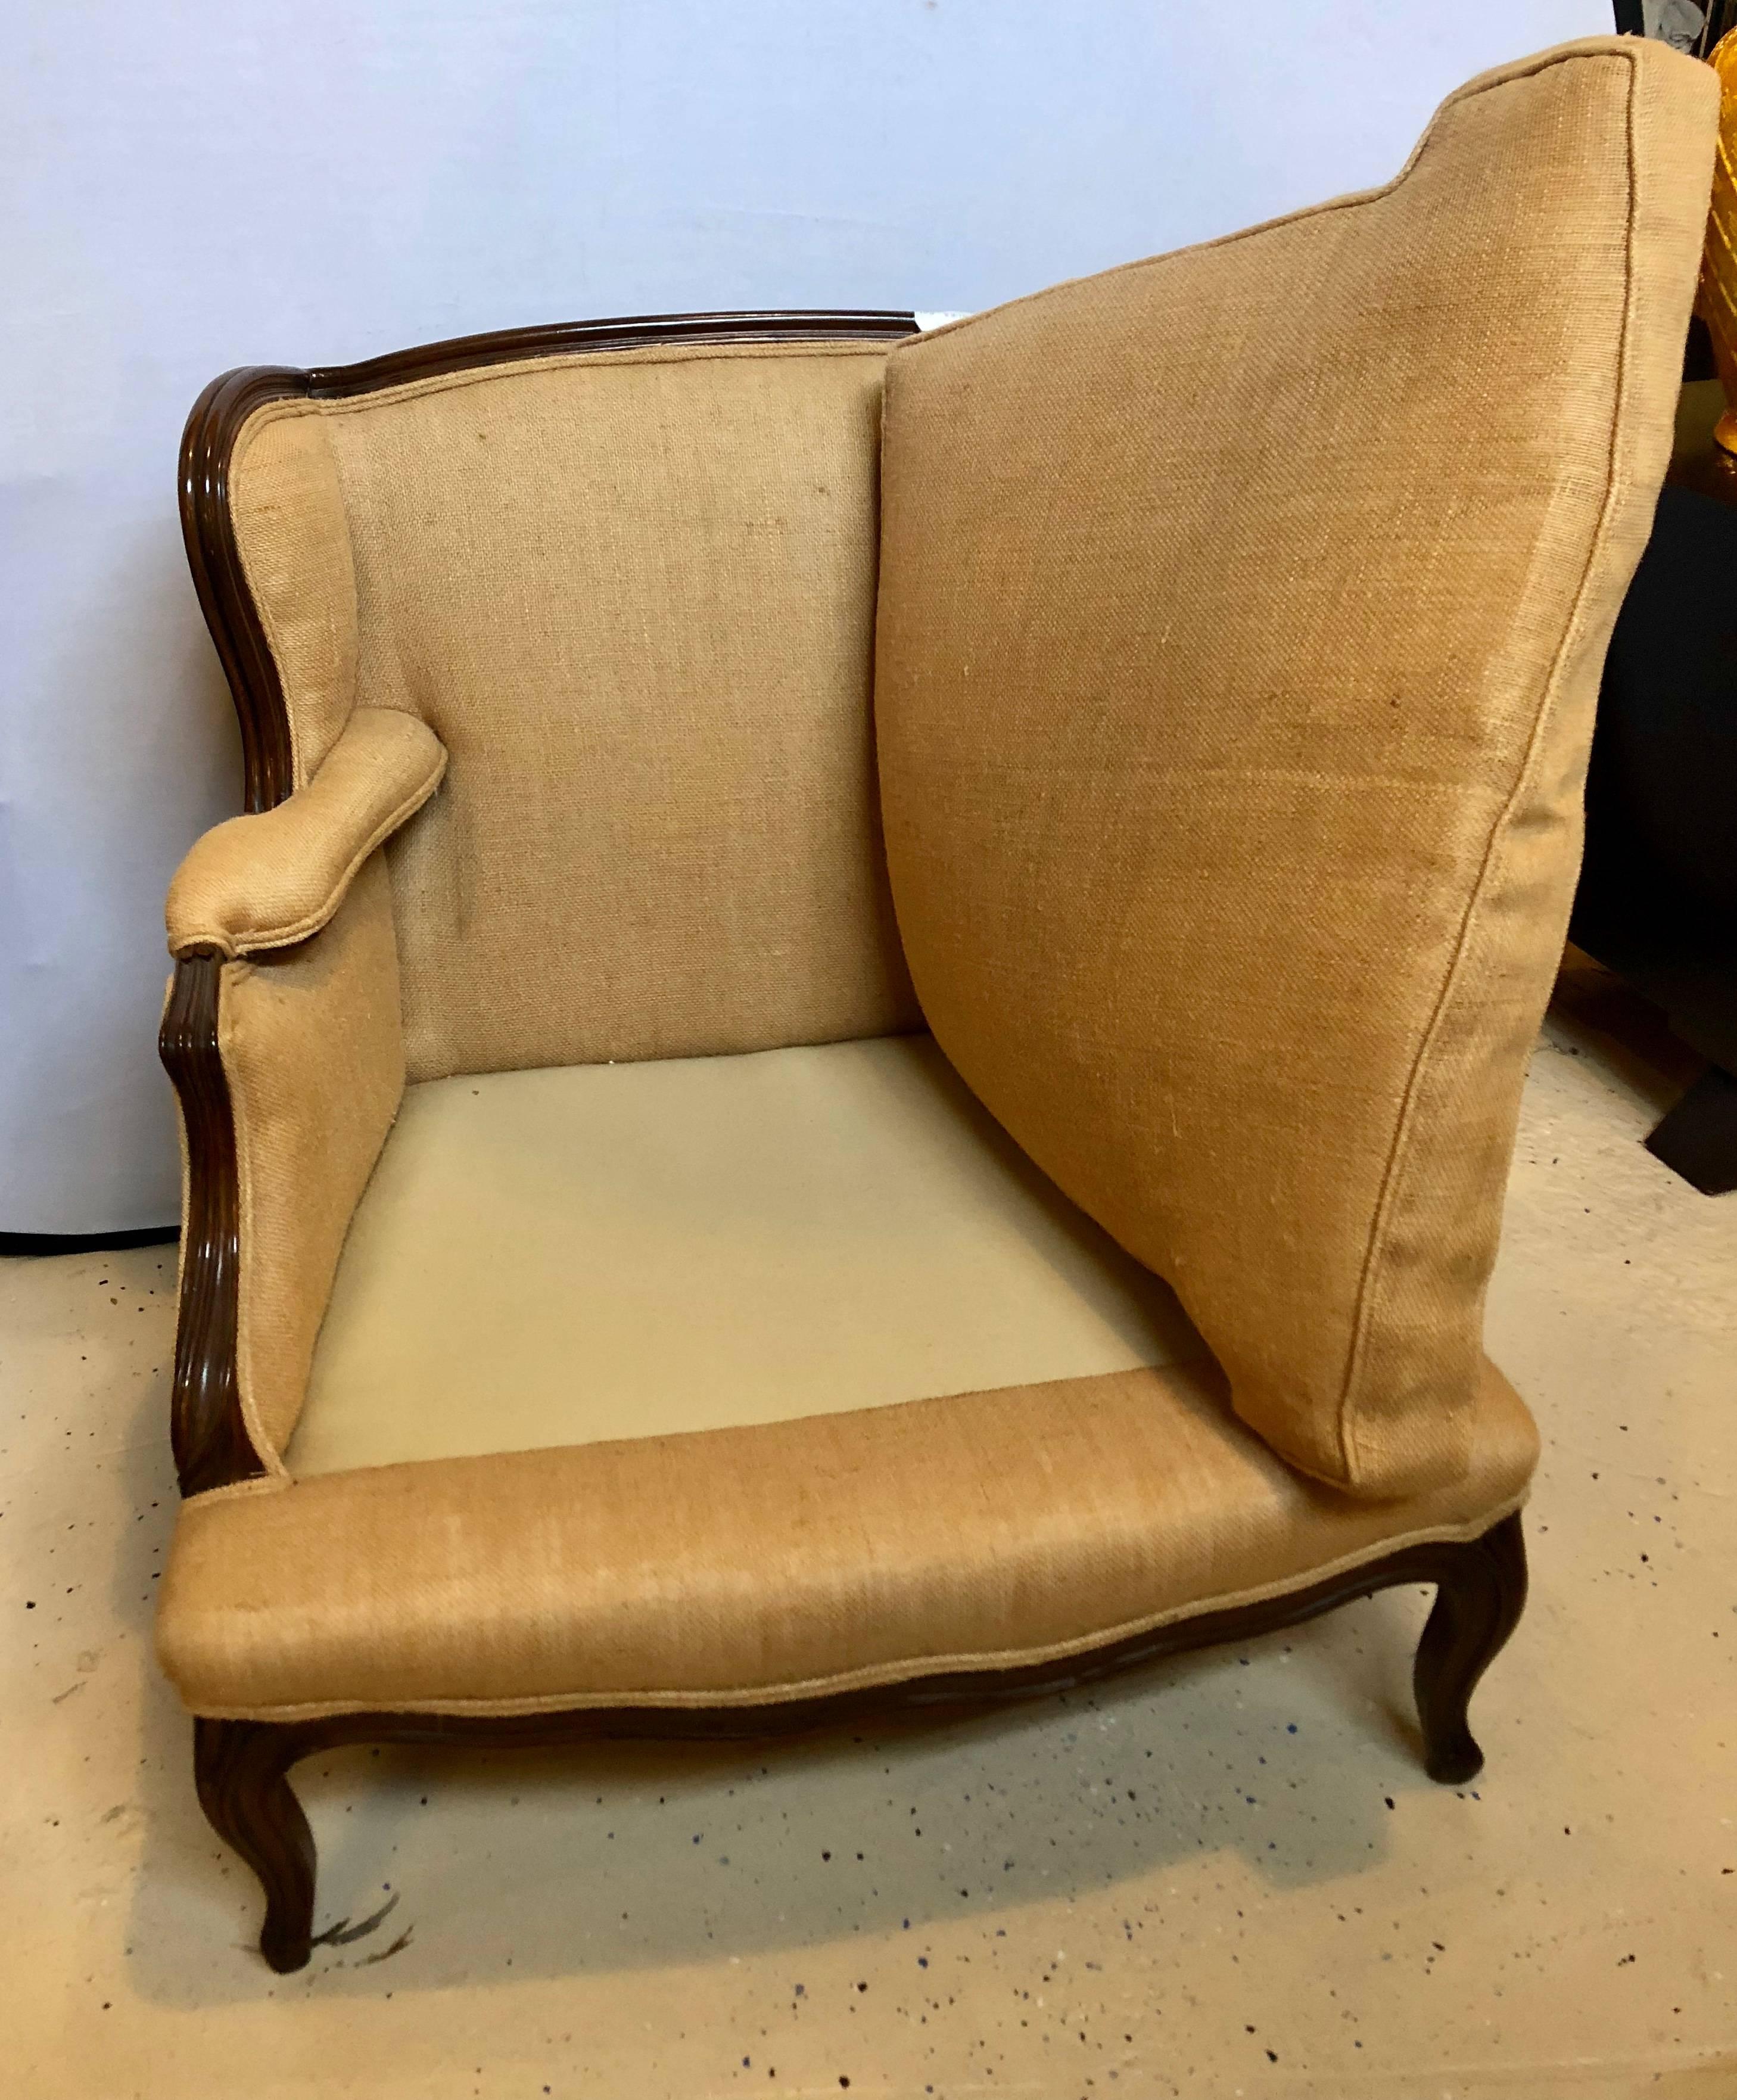 Oversized Wingback Marquis Chair Upholstered in Burlap Carved Wood Details 8